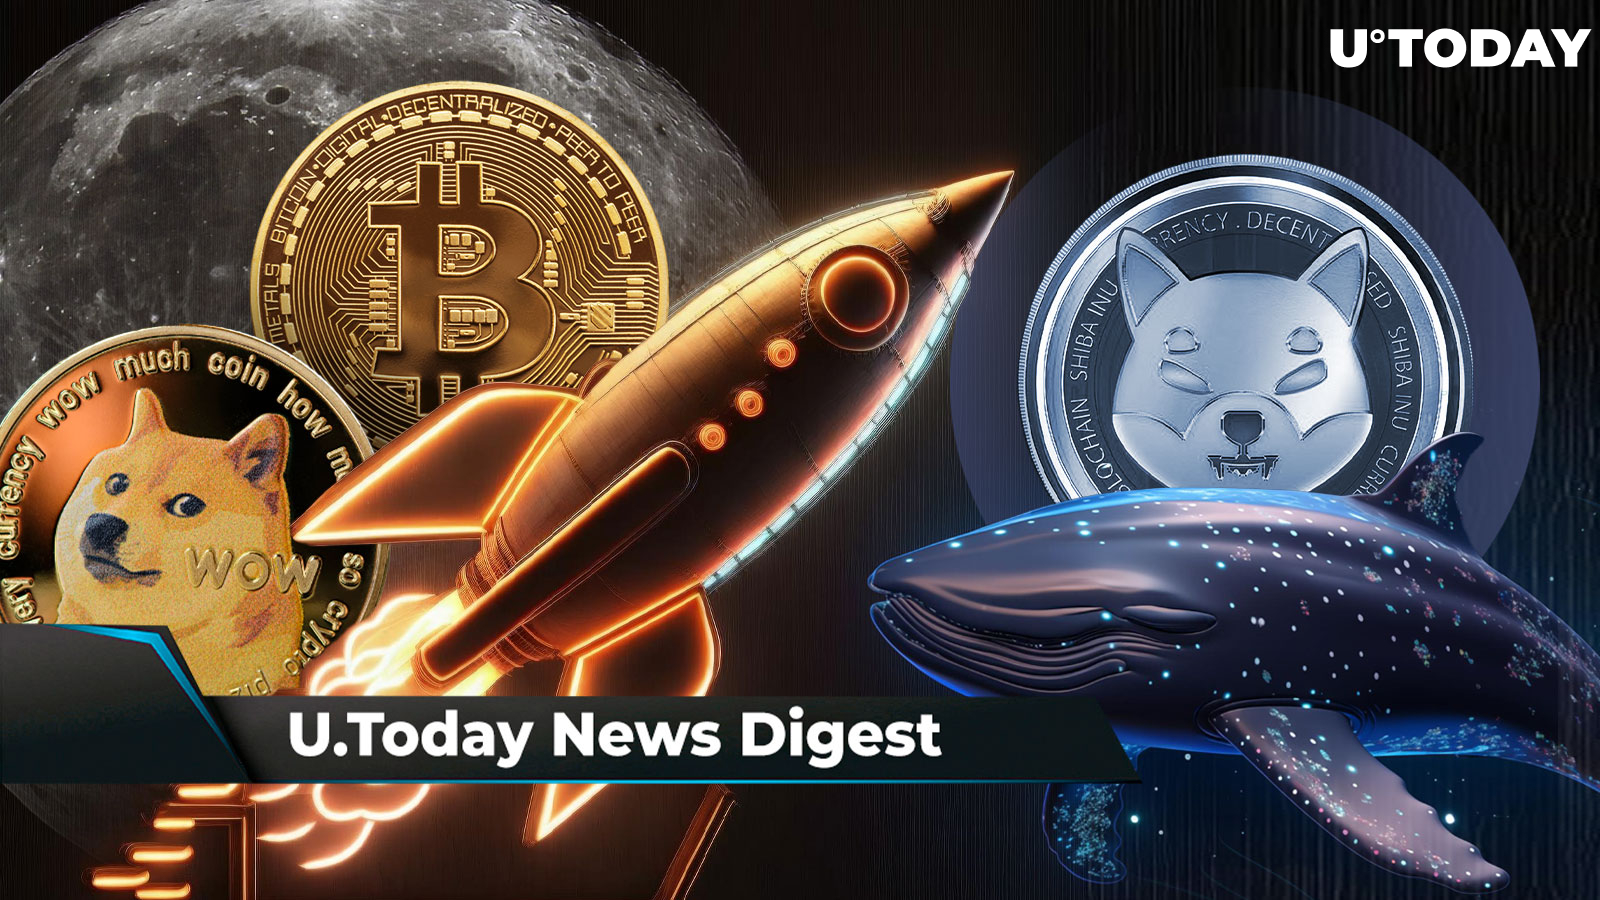 DOGE and BTC Head to Literal Moon, Bitcoin Made History With This Bullish Pattern, 546 Billion SHIB Withdrawn from Binance: Crypto News Digest by U.Today